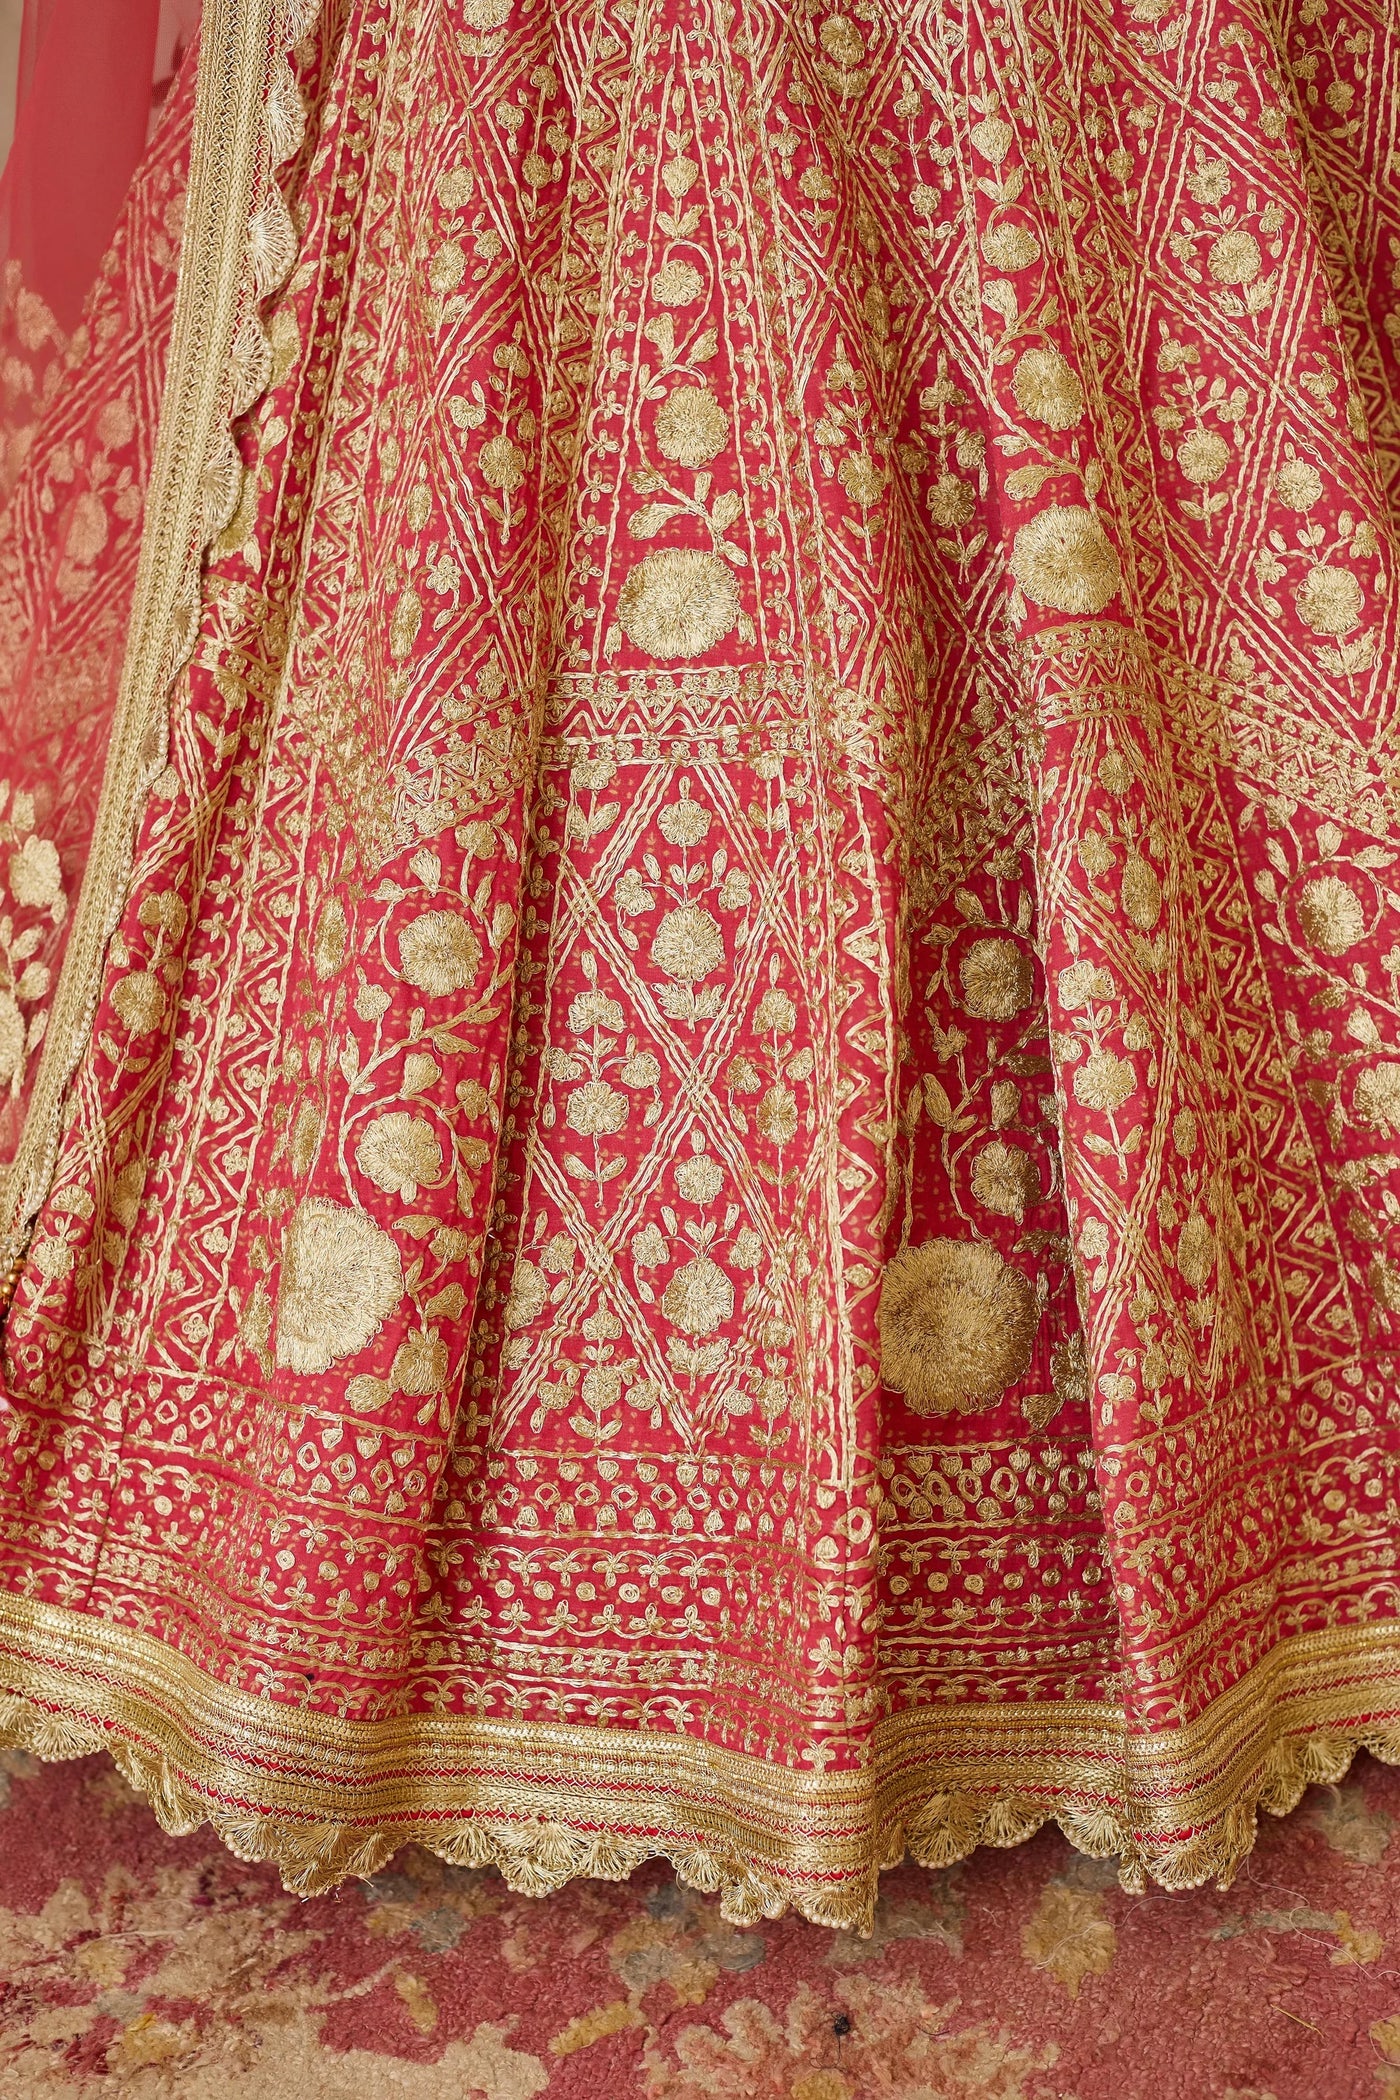 Coral Embroidered Lehenga Indian Clothing in Denver, CO, Aurora, CO, Boulder, CO, Fort Collins, CO, Colorado Springs, CO, Parker, CO, Highlands Ranch, CO, Cherry Creek, CO, Centennial, CO, and Longmont, CO. NATIONWIDE SHIPPING USA- India Fashion X